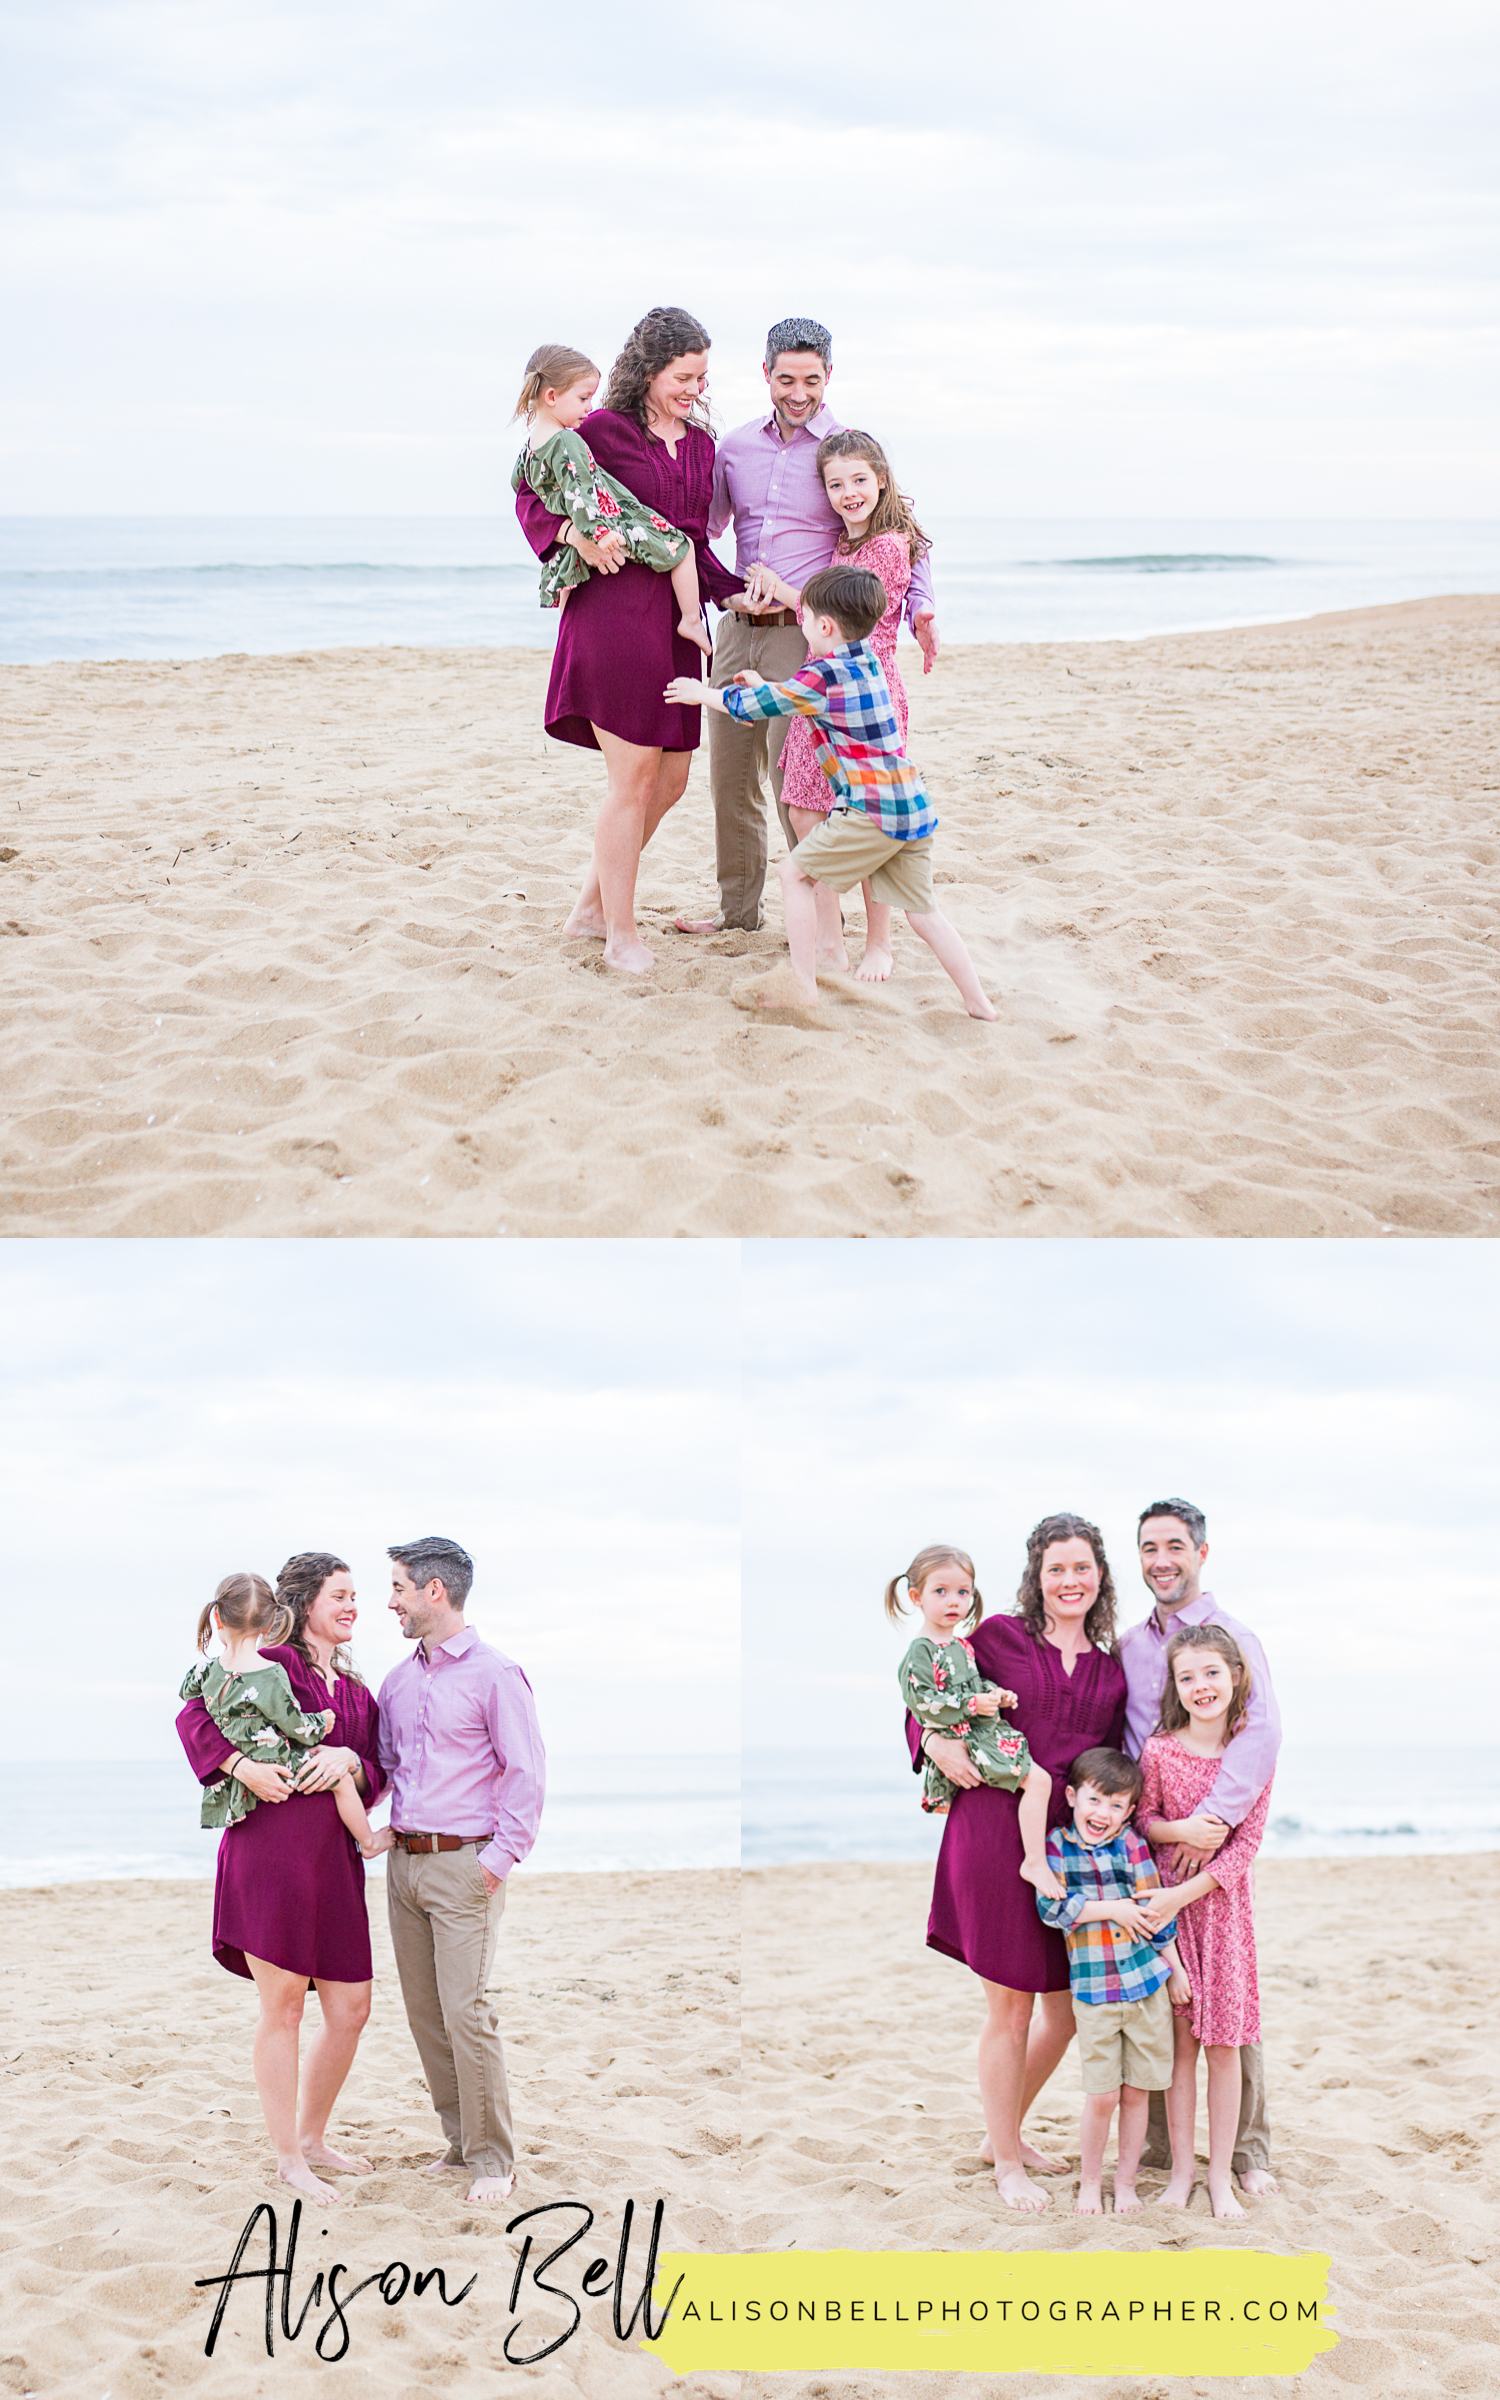 Family photographers in va on the beach by alison bell photographer